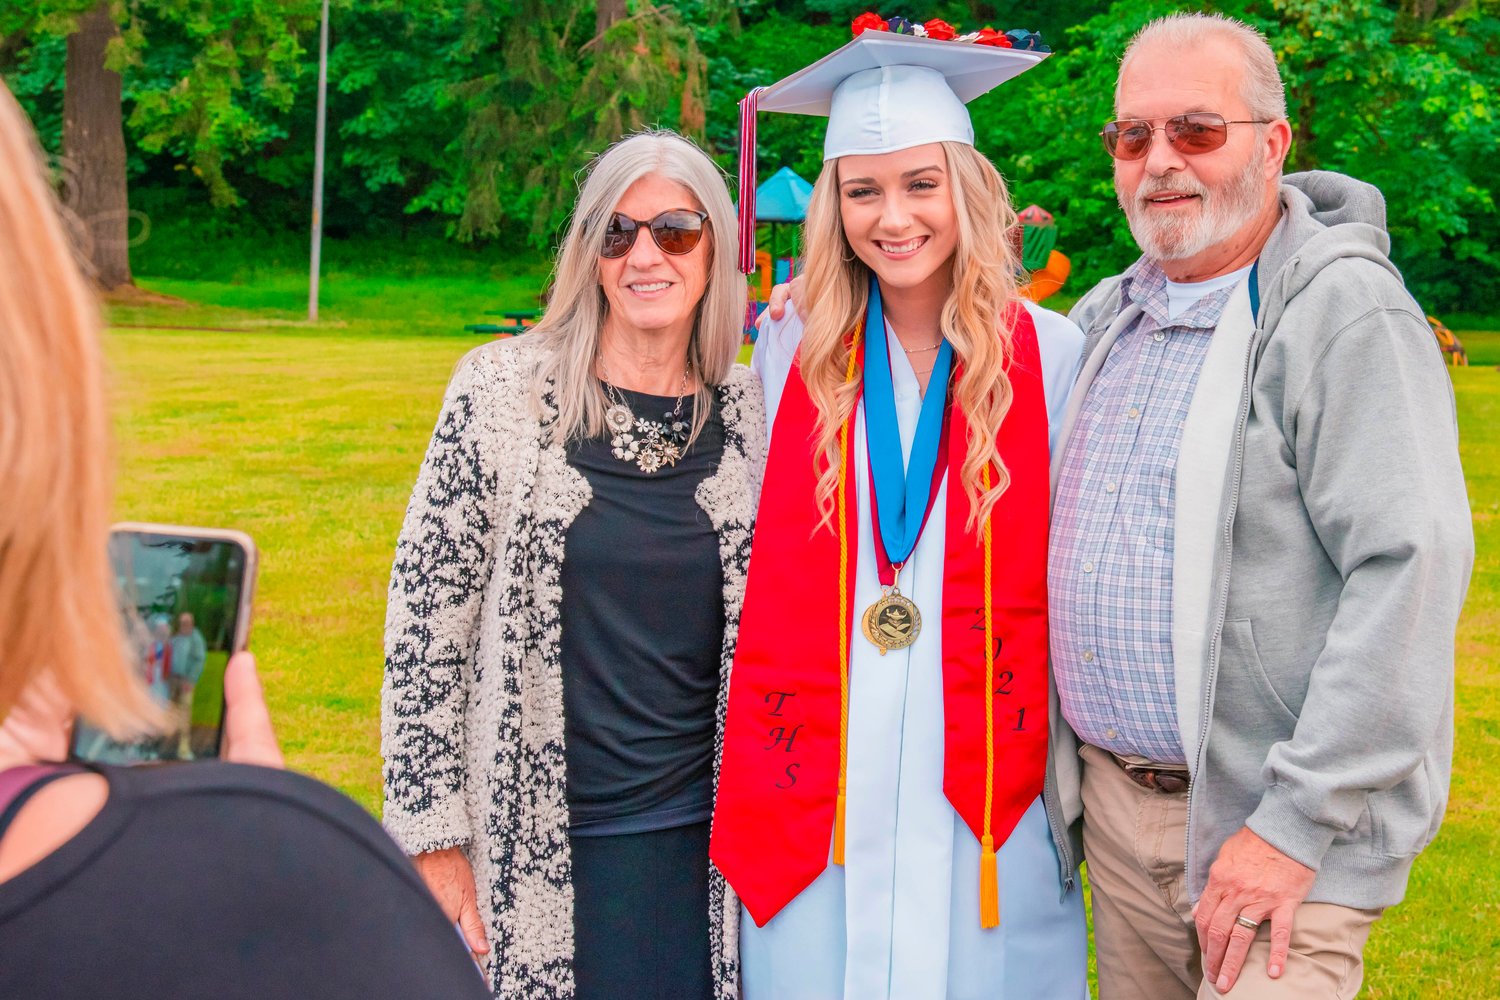 Salutatorian Autumn Long smiles and poses with grandparents while her mother takes a photo Friday at Tenino City Park.